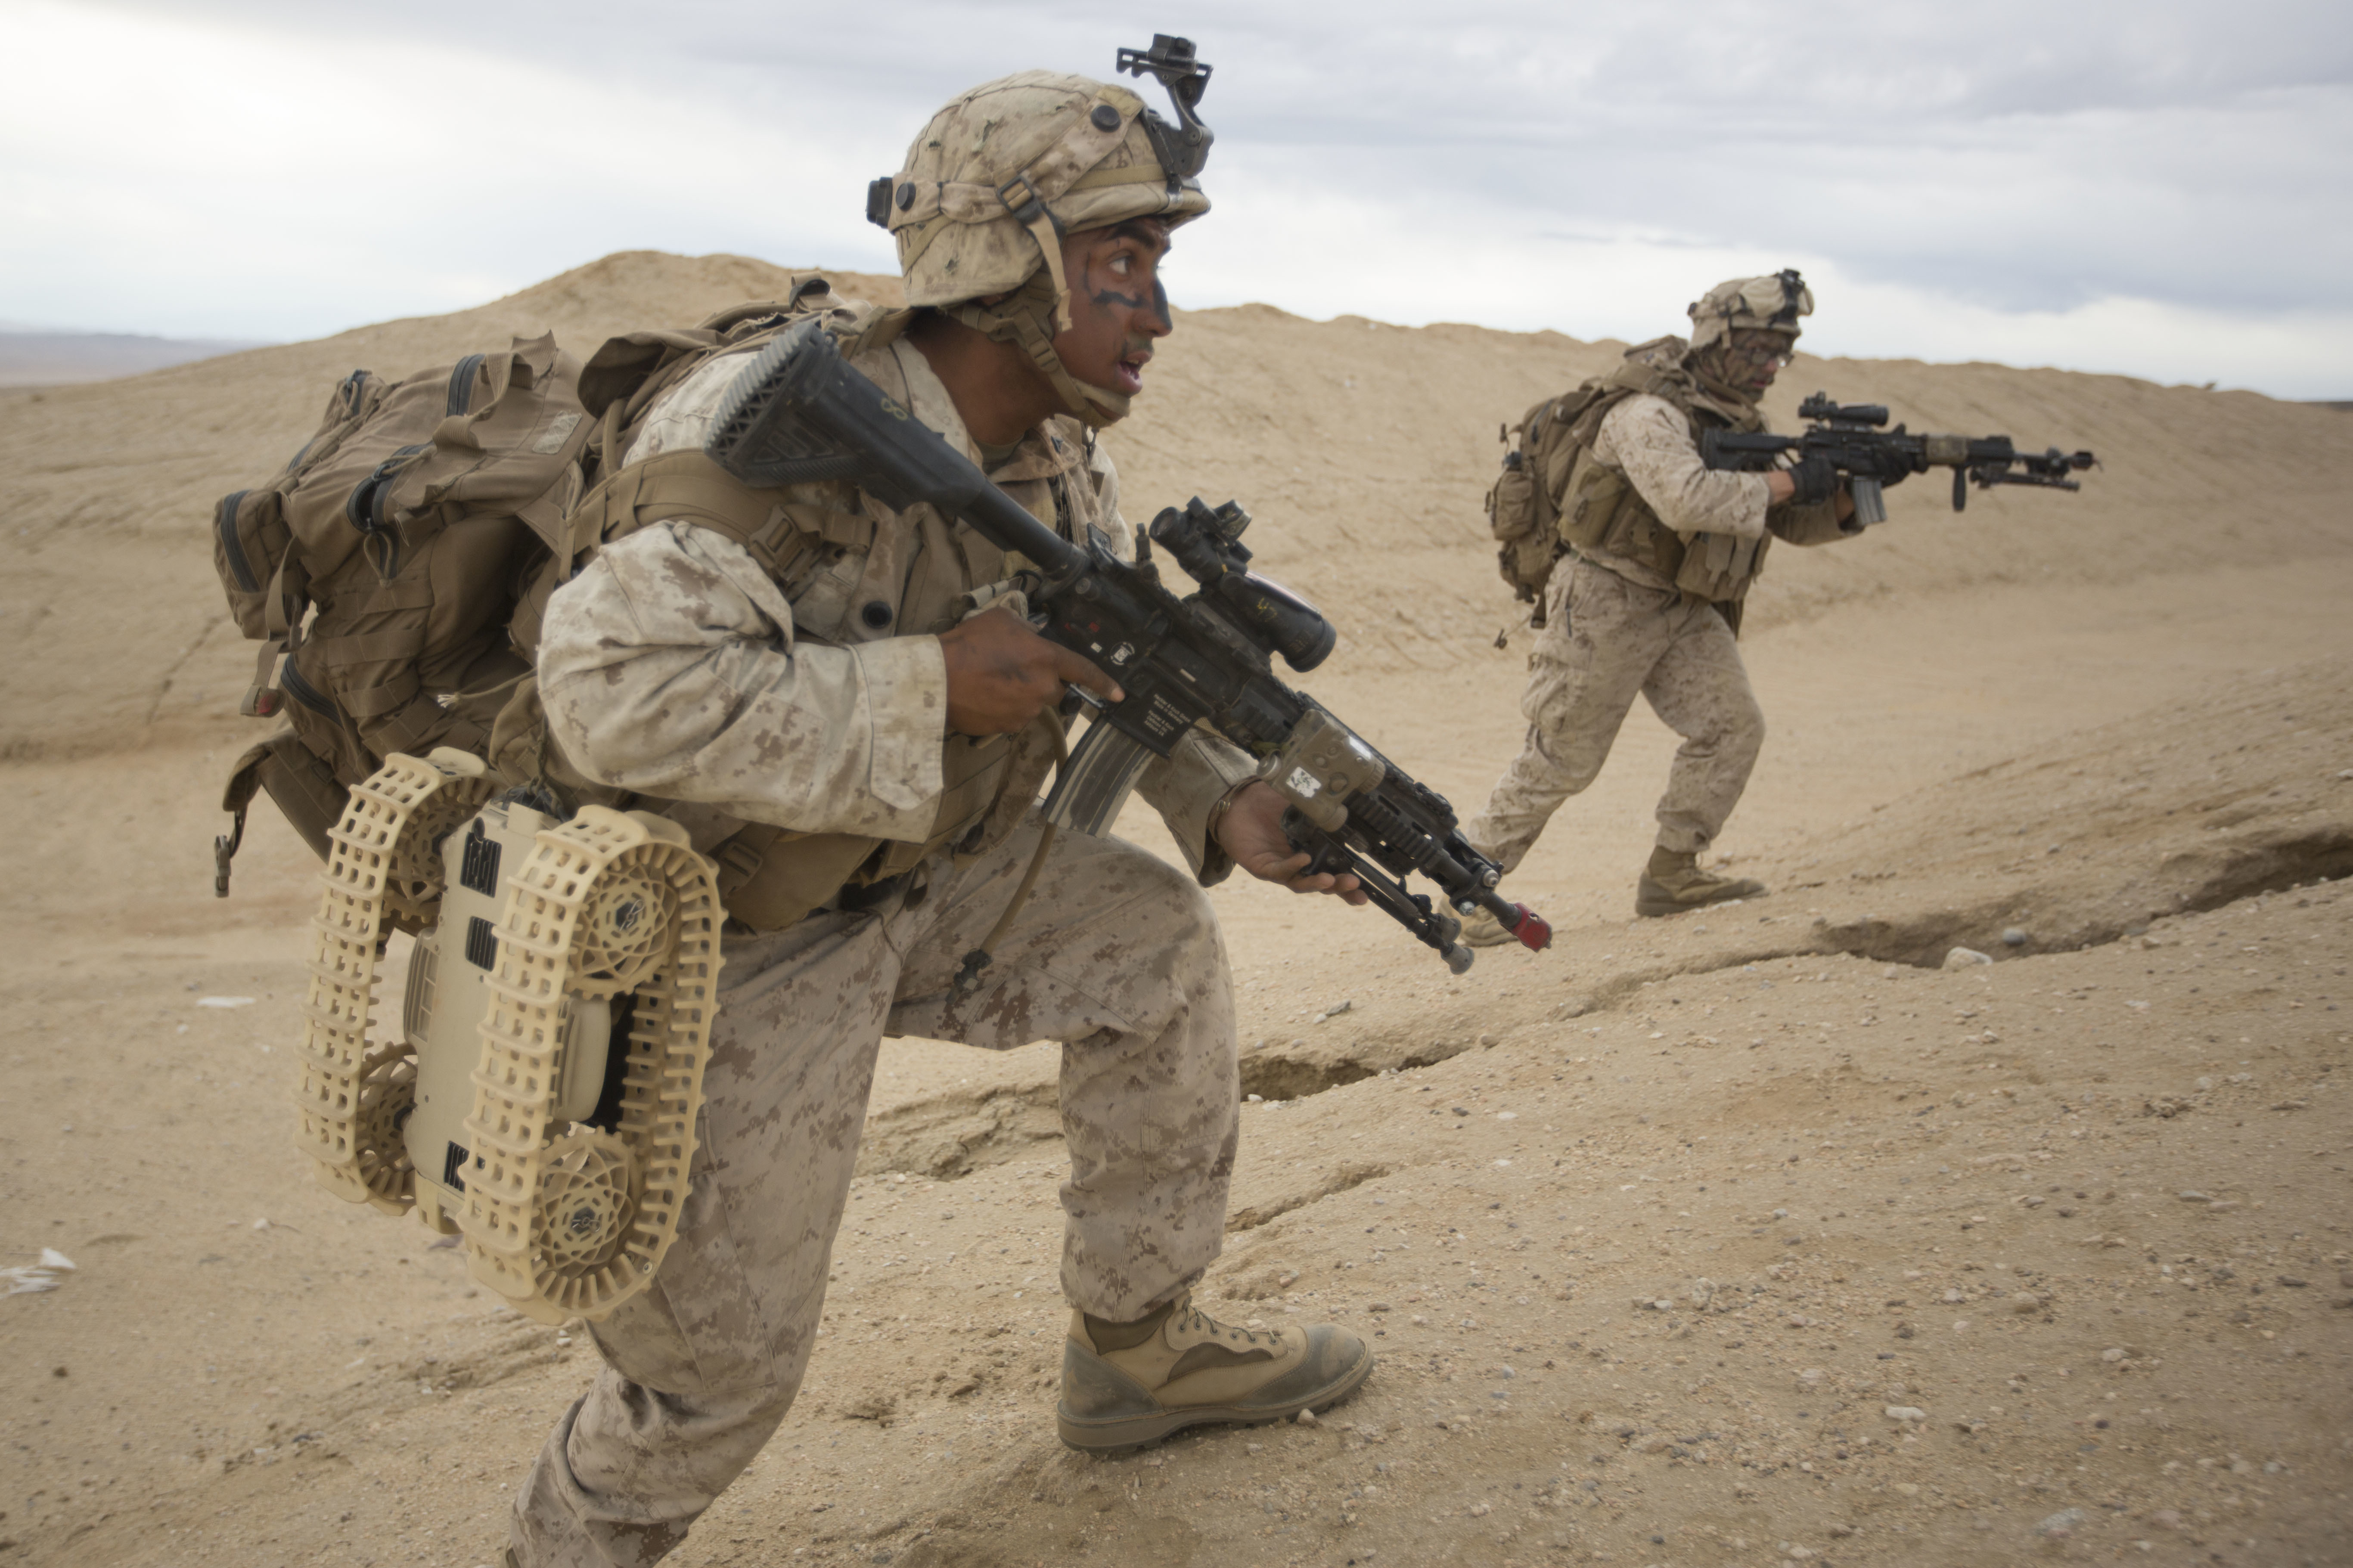 United States Marine Corps Lance Cpl Antonio Marin, 3rd Battalion, 5th Marine Regiment, India Company, moves to the side a hill to deploy an unmanned Dragonrider drone in a hostile mountain town in Marine Corps Air Ground Combat Center 29 Palms, Calif. Oct 23, 2016. Marines of 3/5 are currently field testing equipment and technology from the Marine Corps War Fighting Lab during Integrated Training Exercise 1-17 in order to enhance and sustain combined arms proficiency in preparation for their deployment as the Ground Combat Element for the 31st Marine Expeditionary Unit. (United States Marine Corps photo by Lance Cpl Samuel Brusseau.)